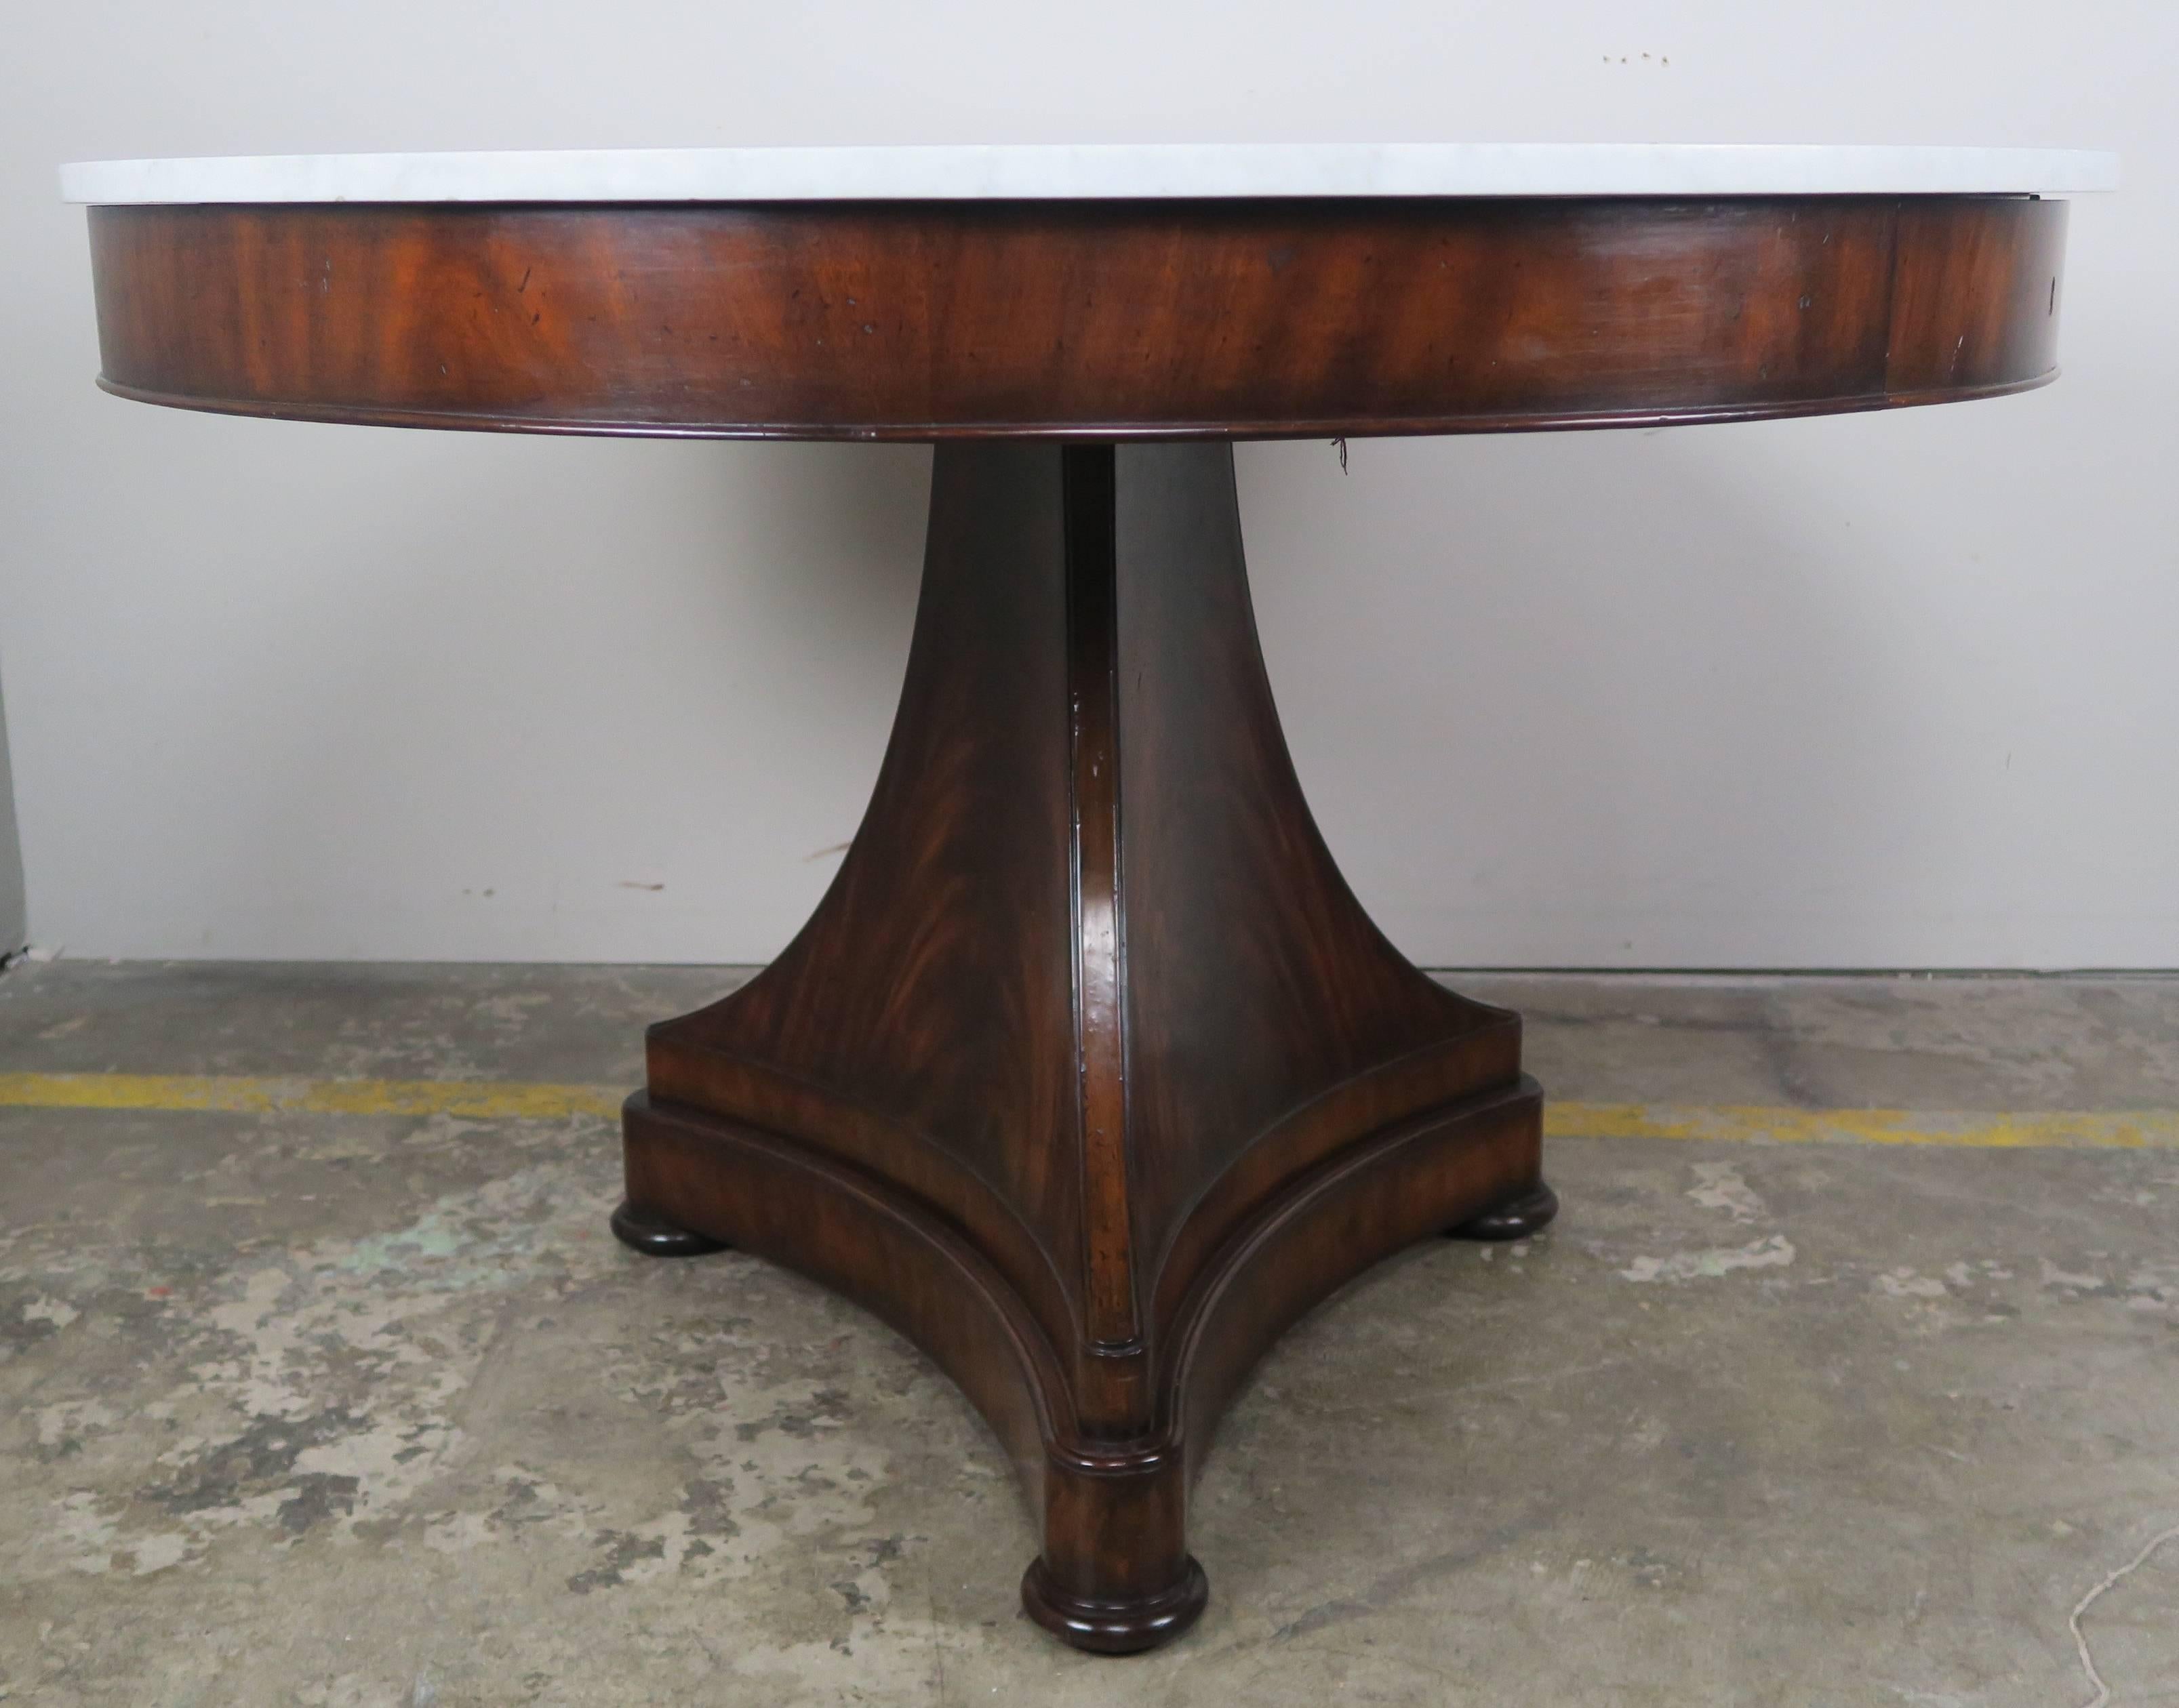 Ralph Lauren flamed mahogany centre table with white marble top. The table sits on a single pedestal base that stands on three bun feet. Two drawers on opposite ends of table.